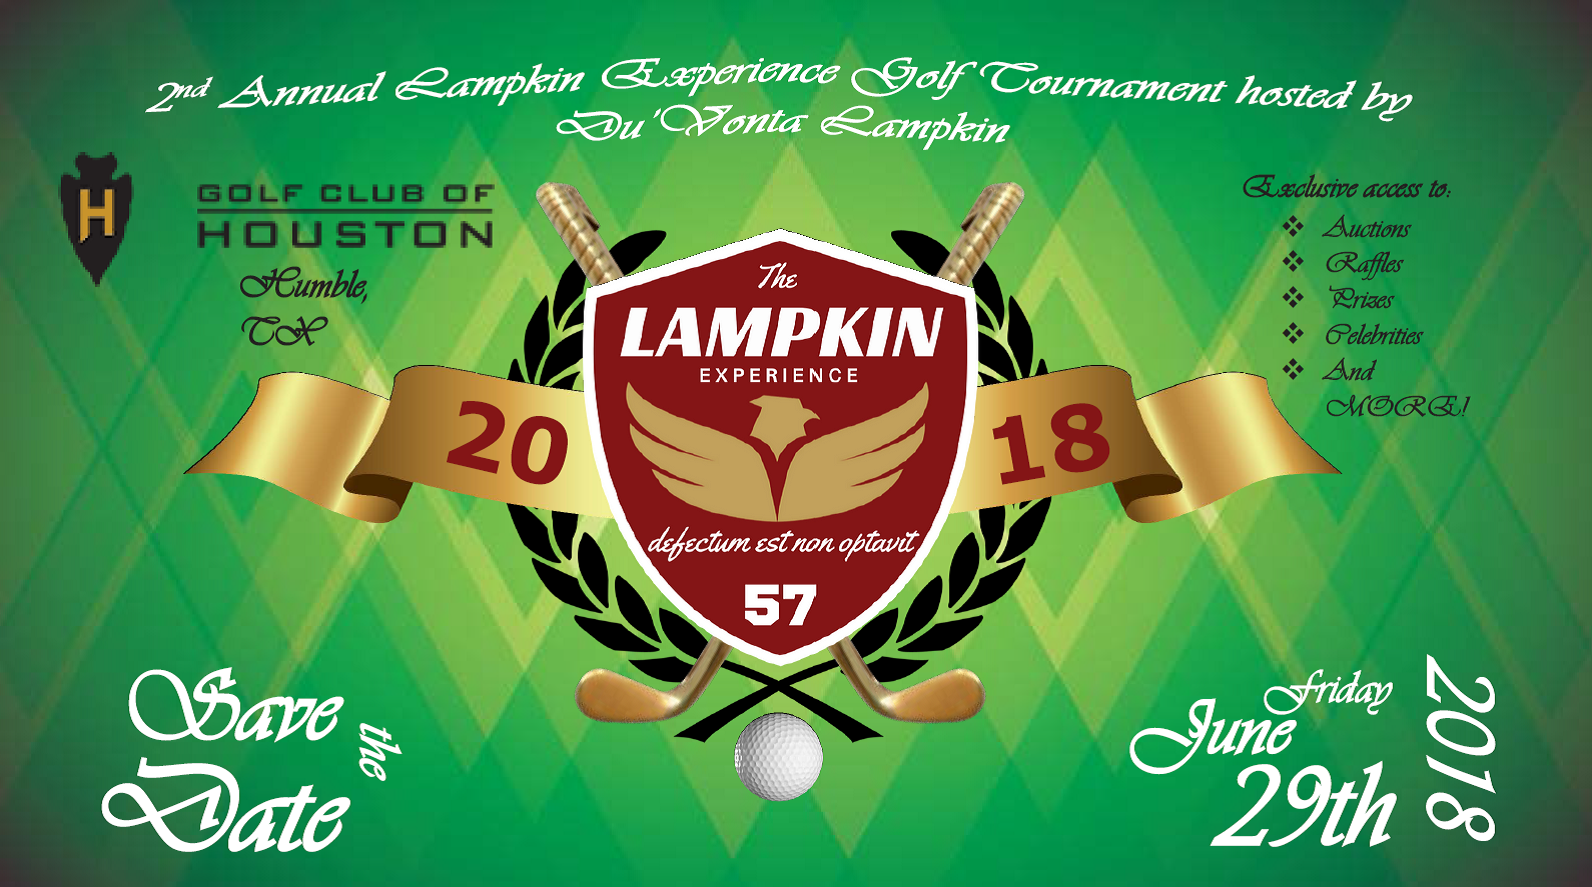 The Lampkin Experience Charity Golf Tournament